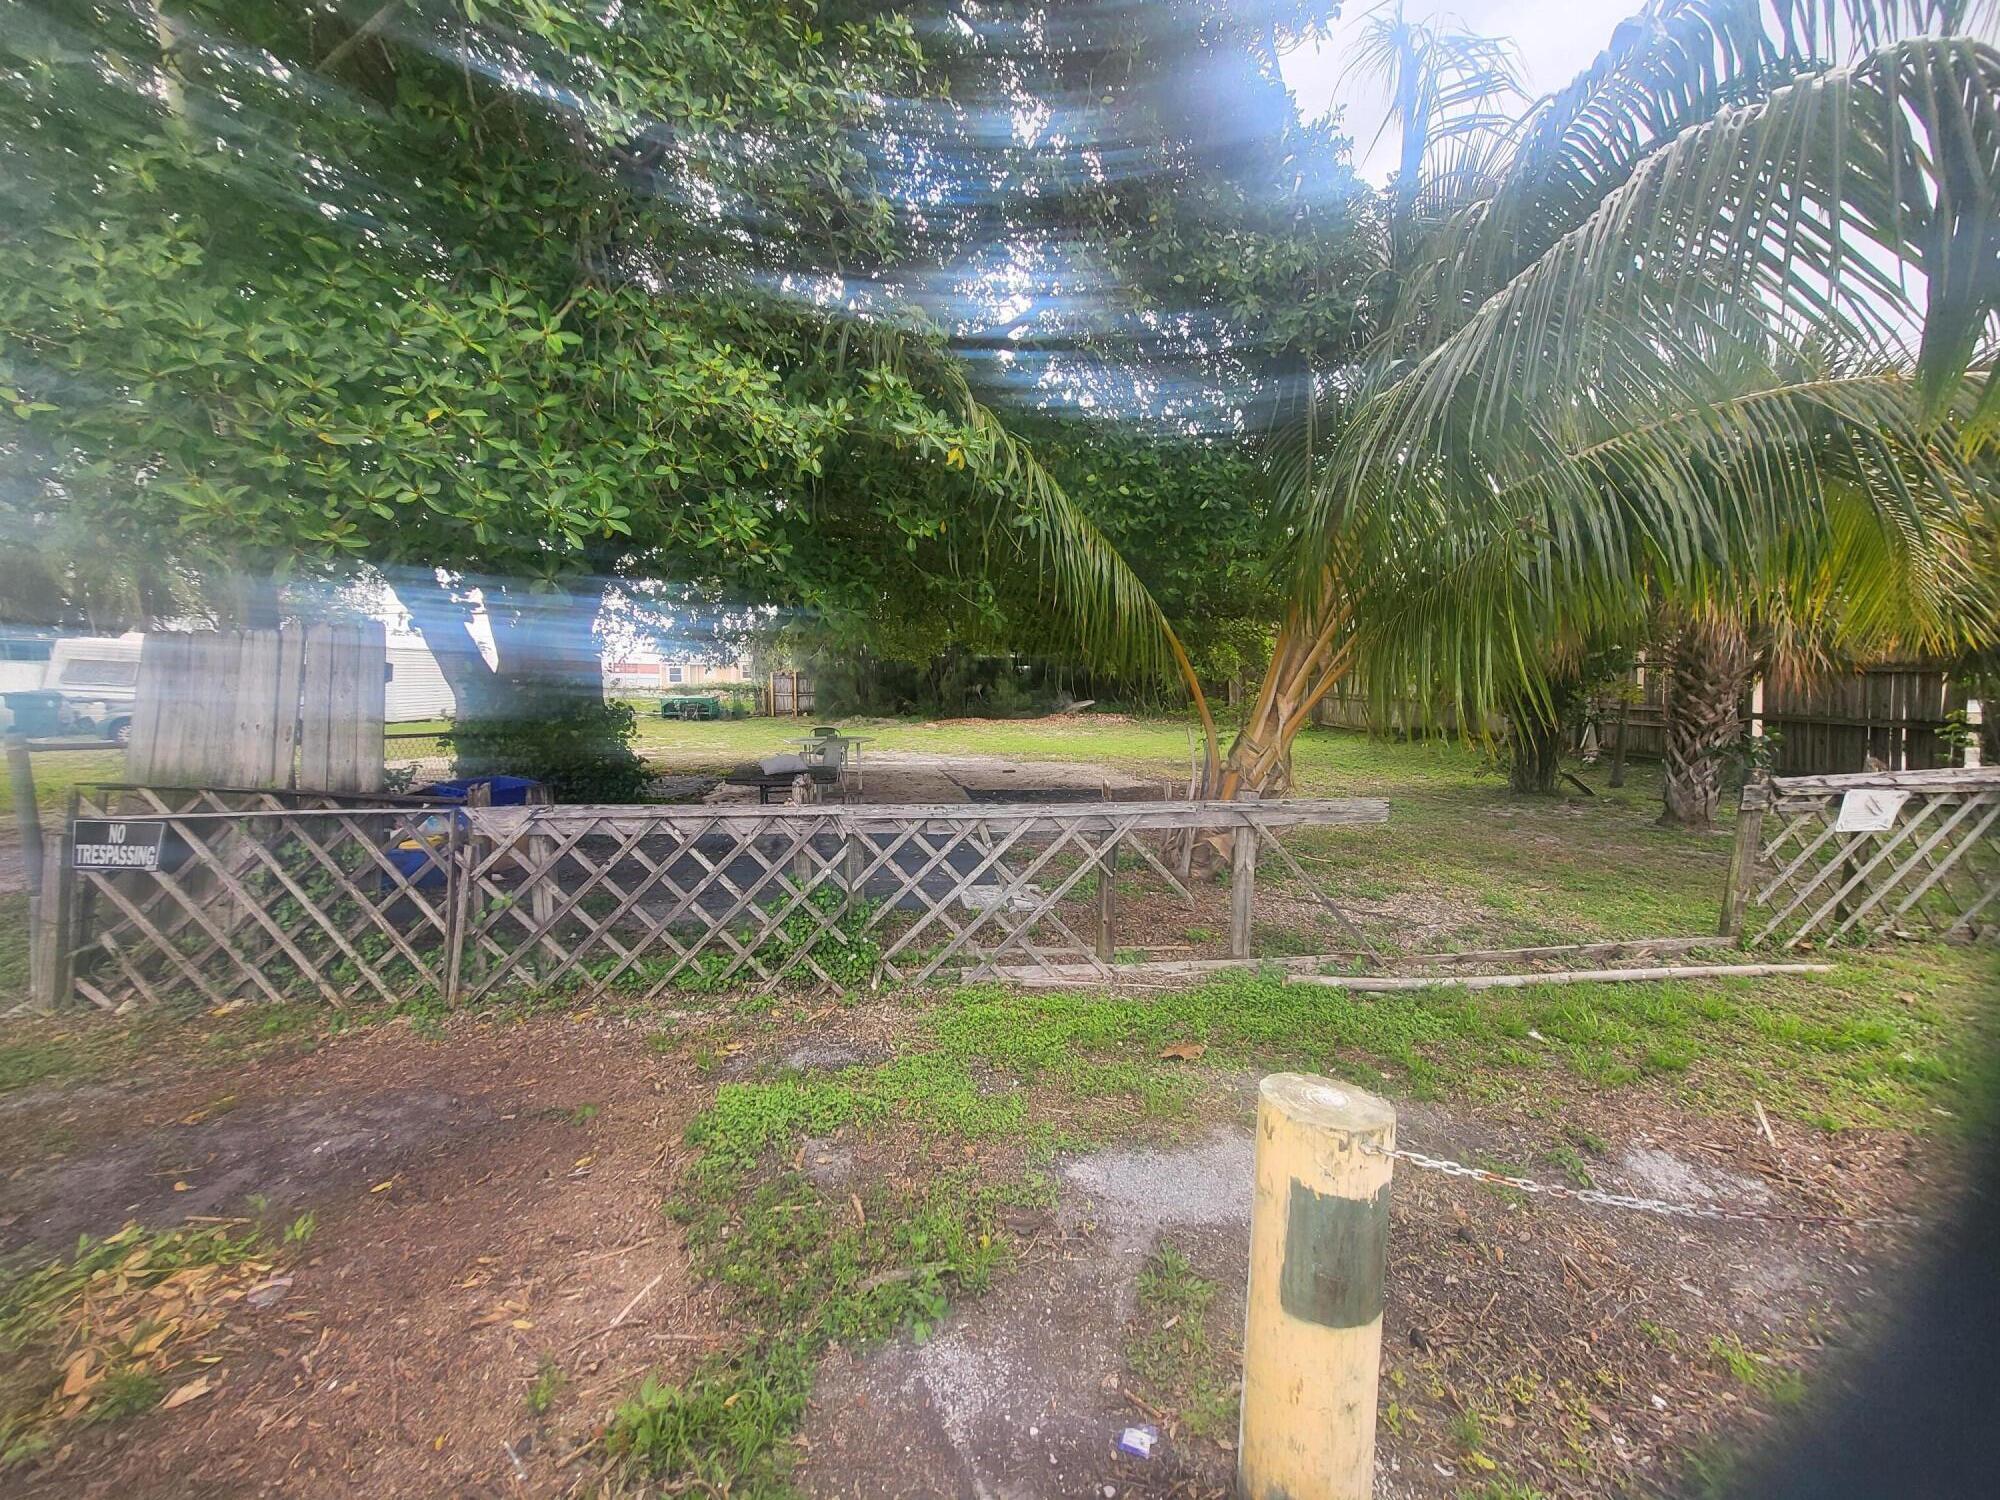 a view of a yard with palm trees